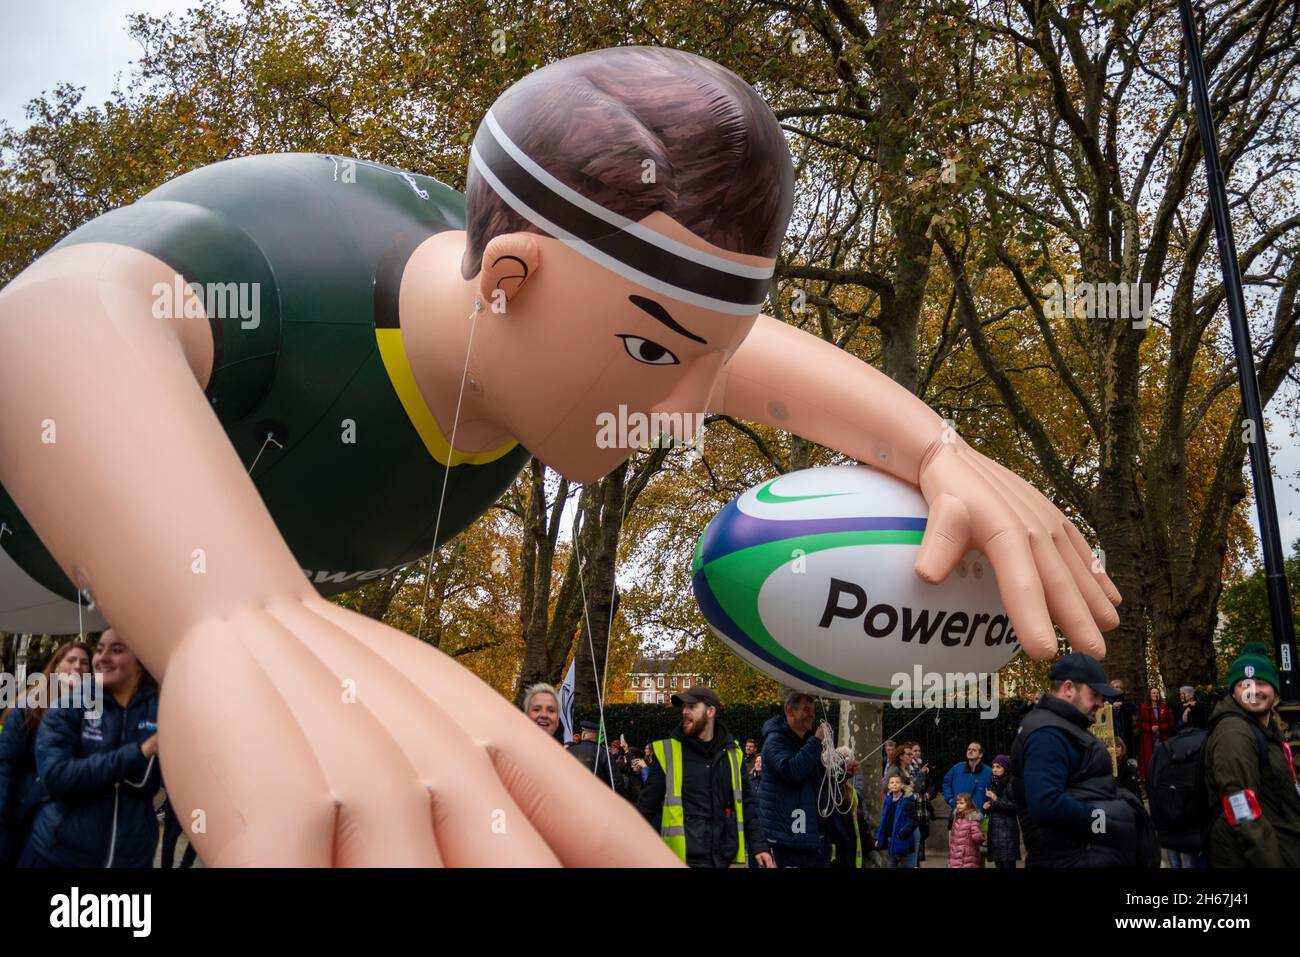 London Irish Rugby Club and Powerday float at the Lord Mayor's Show, Parade, procession, London, UK. Giant inflatable rugby player, balloon Stock Photo